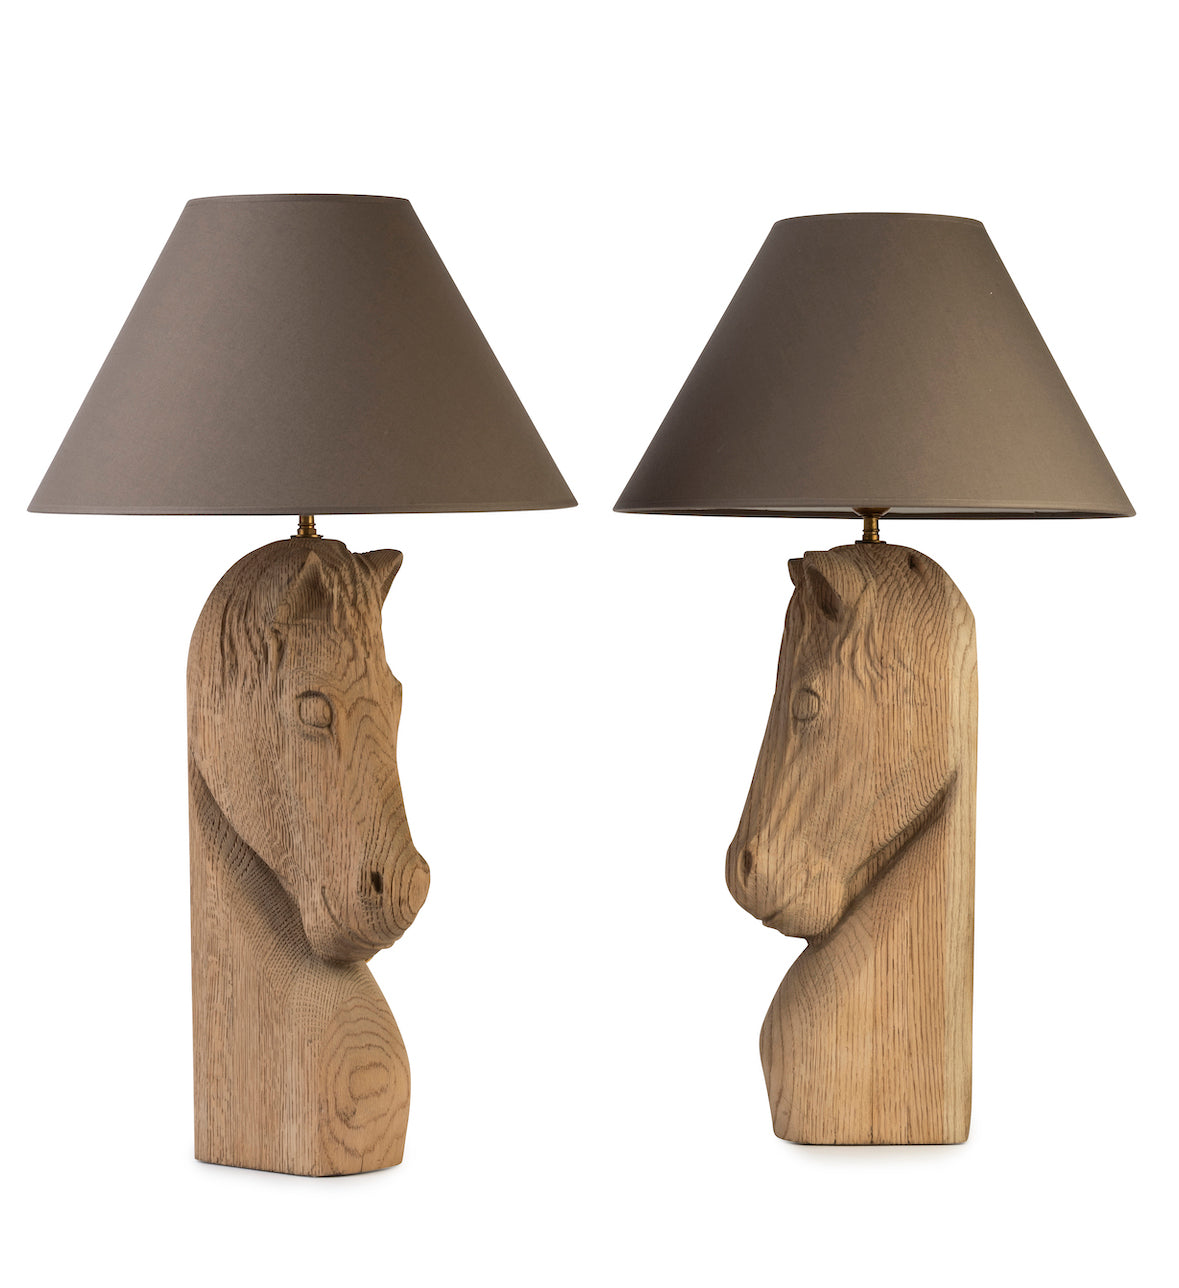 SOLD A pair of unusual carved French natural oak stylized horse-head form table lamps